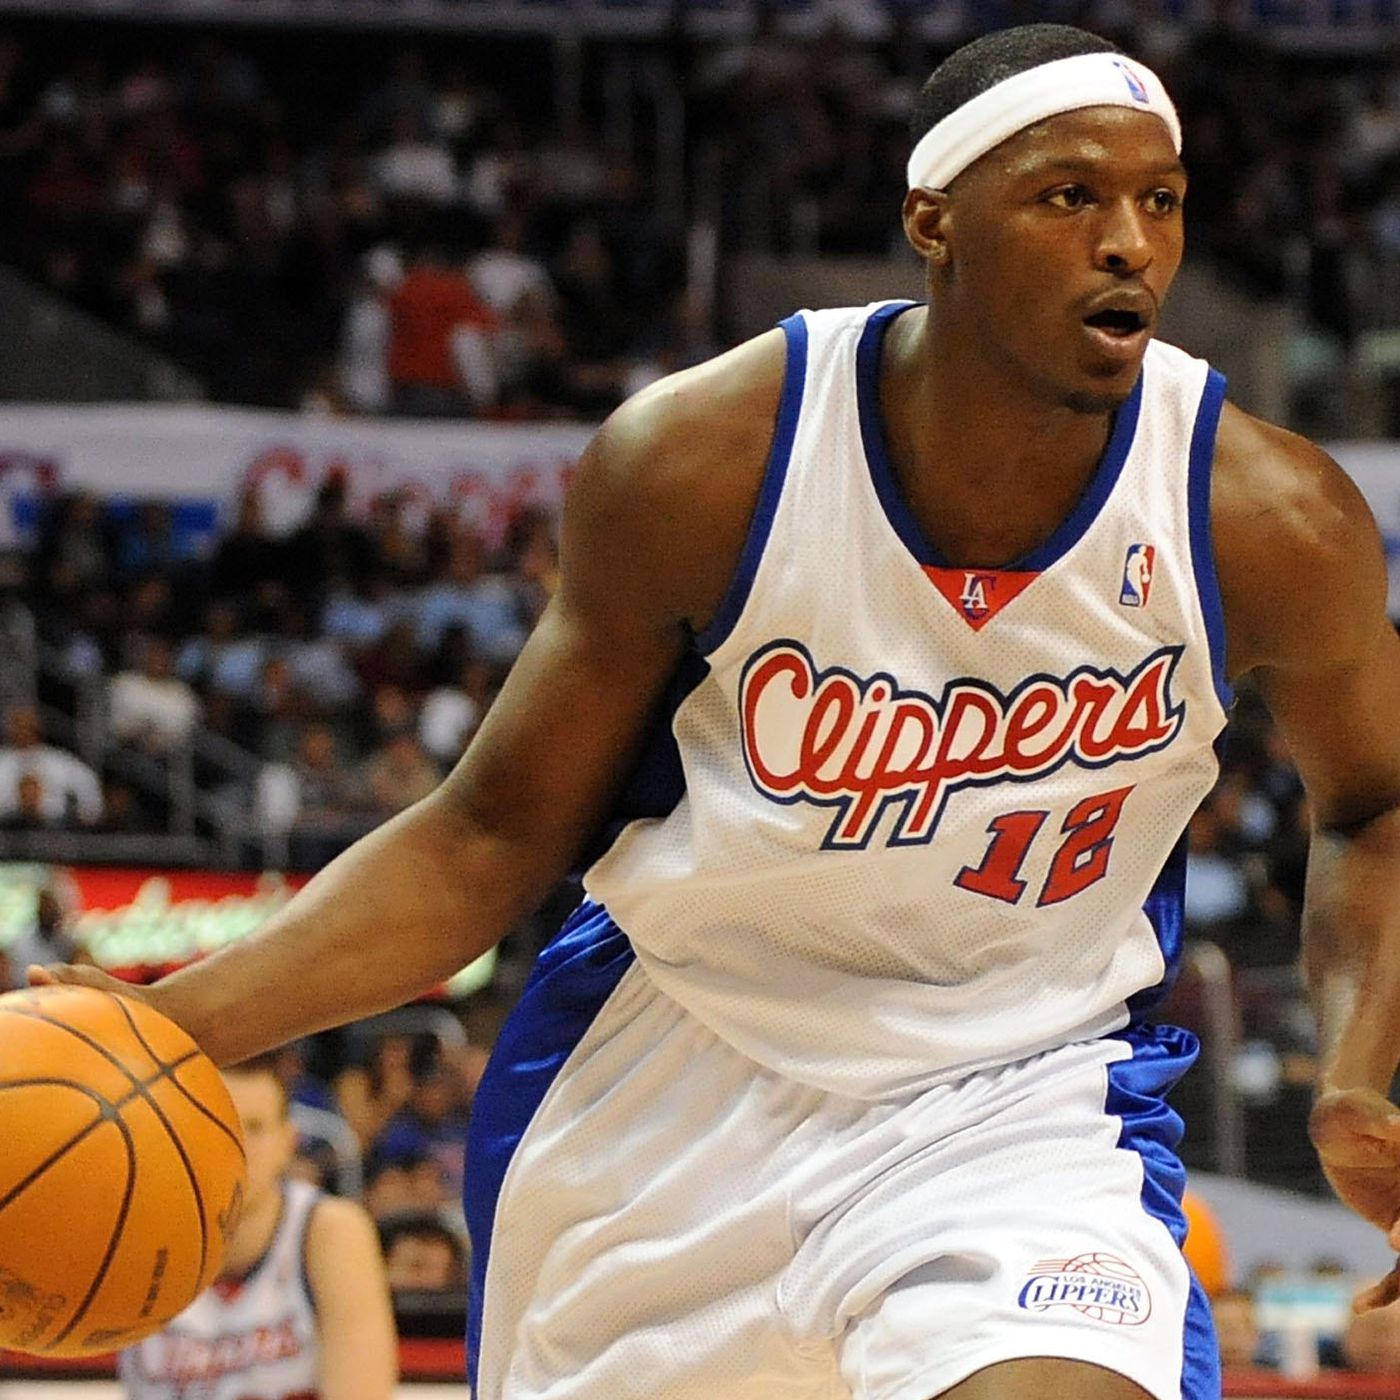 Al Thornton in action for the Clippers (Source: Clips Nation)